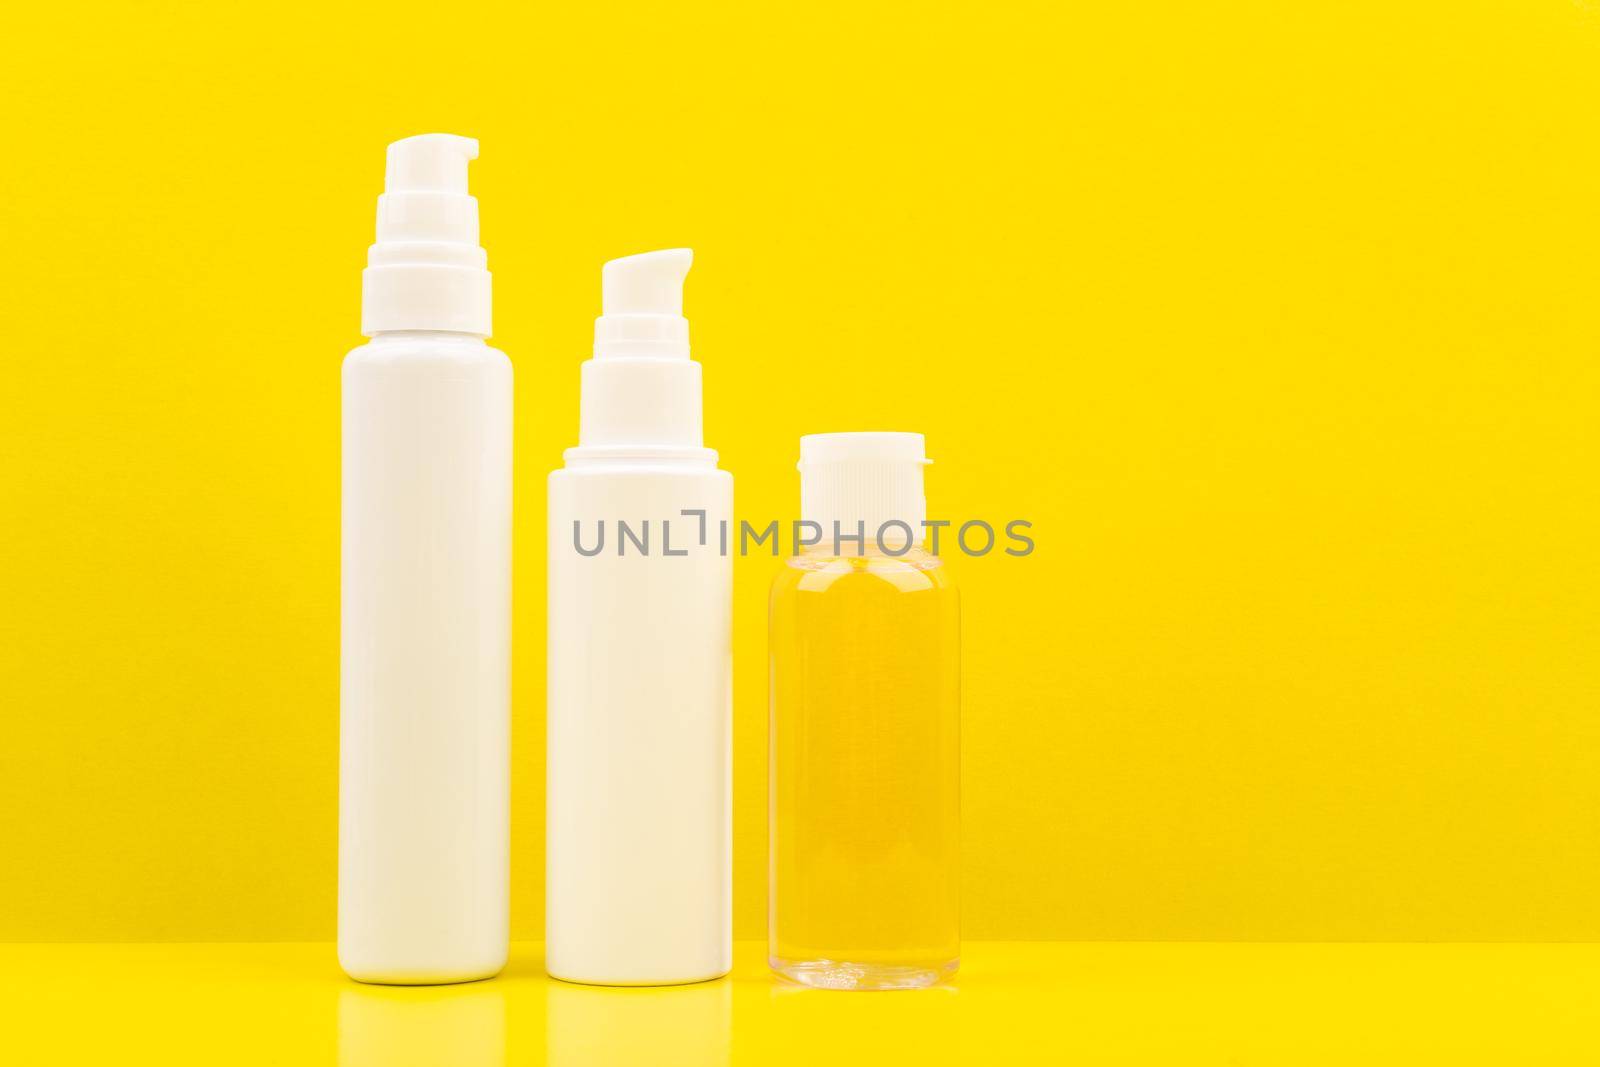 Set of cosmetic products for daily skincare against bright yellow background with space for text